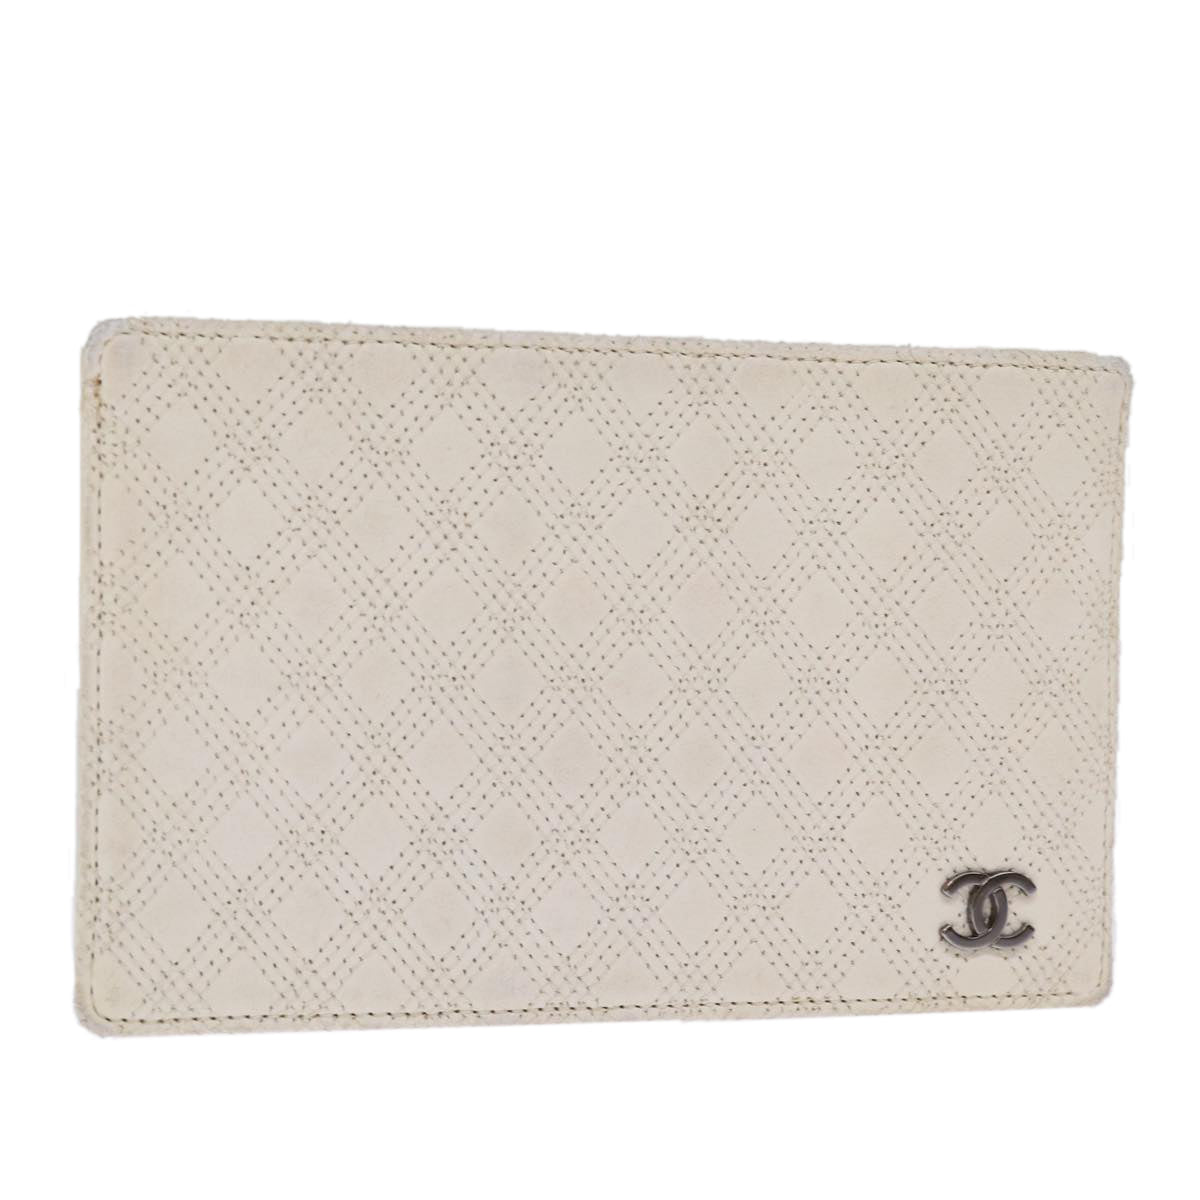 CHANEL Matelasse Pass Case Leather White CC Auth bs14237